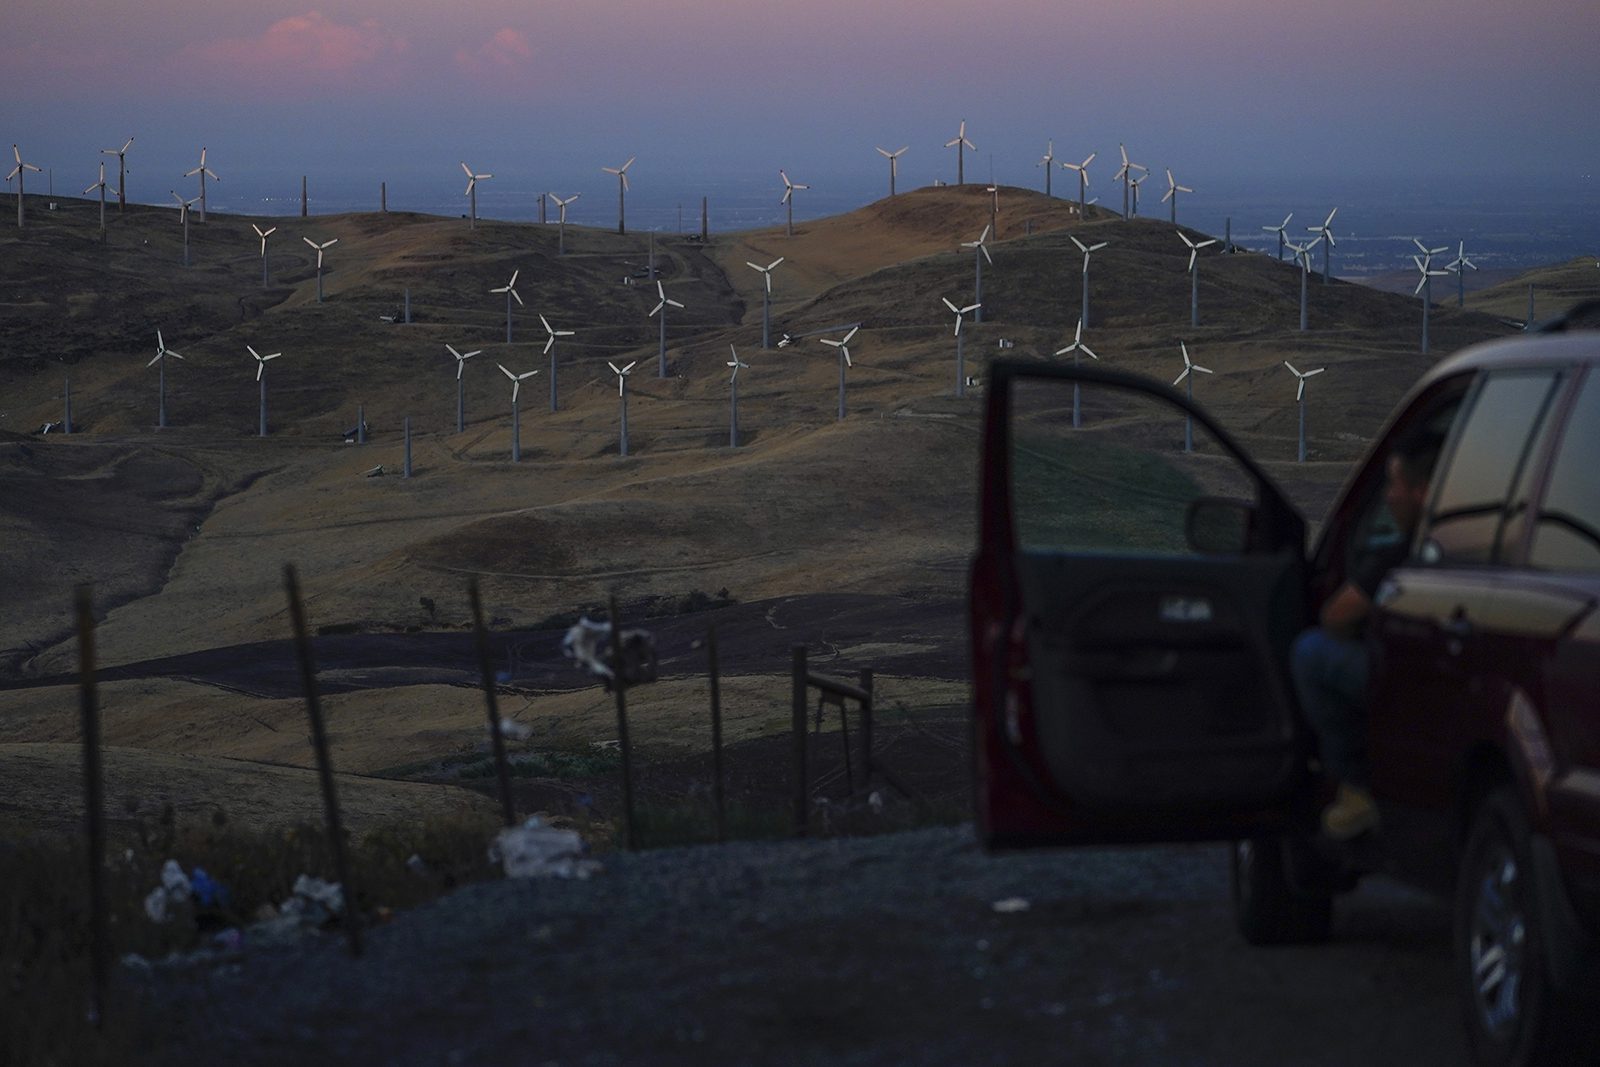 A man looks out at wind turbines in Livermore, Calif., Wednesday, Aug. 10, 2022. Congress is poised to pass a transformative climate change bill on Friday, Aug. 12. The crux of the long-delayed bill is to use incentives to accelerate the expansion of clean energy such as wind and solar power, speeding the transition away from the oil, coal and gas that largely cause climate change. (AP Photo/Godofredo A. Vásquez)